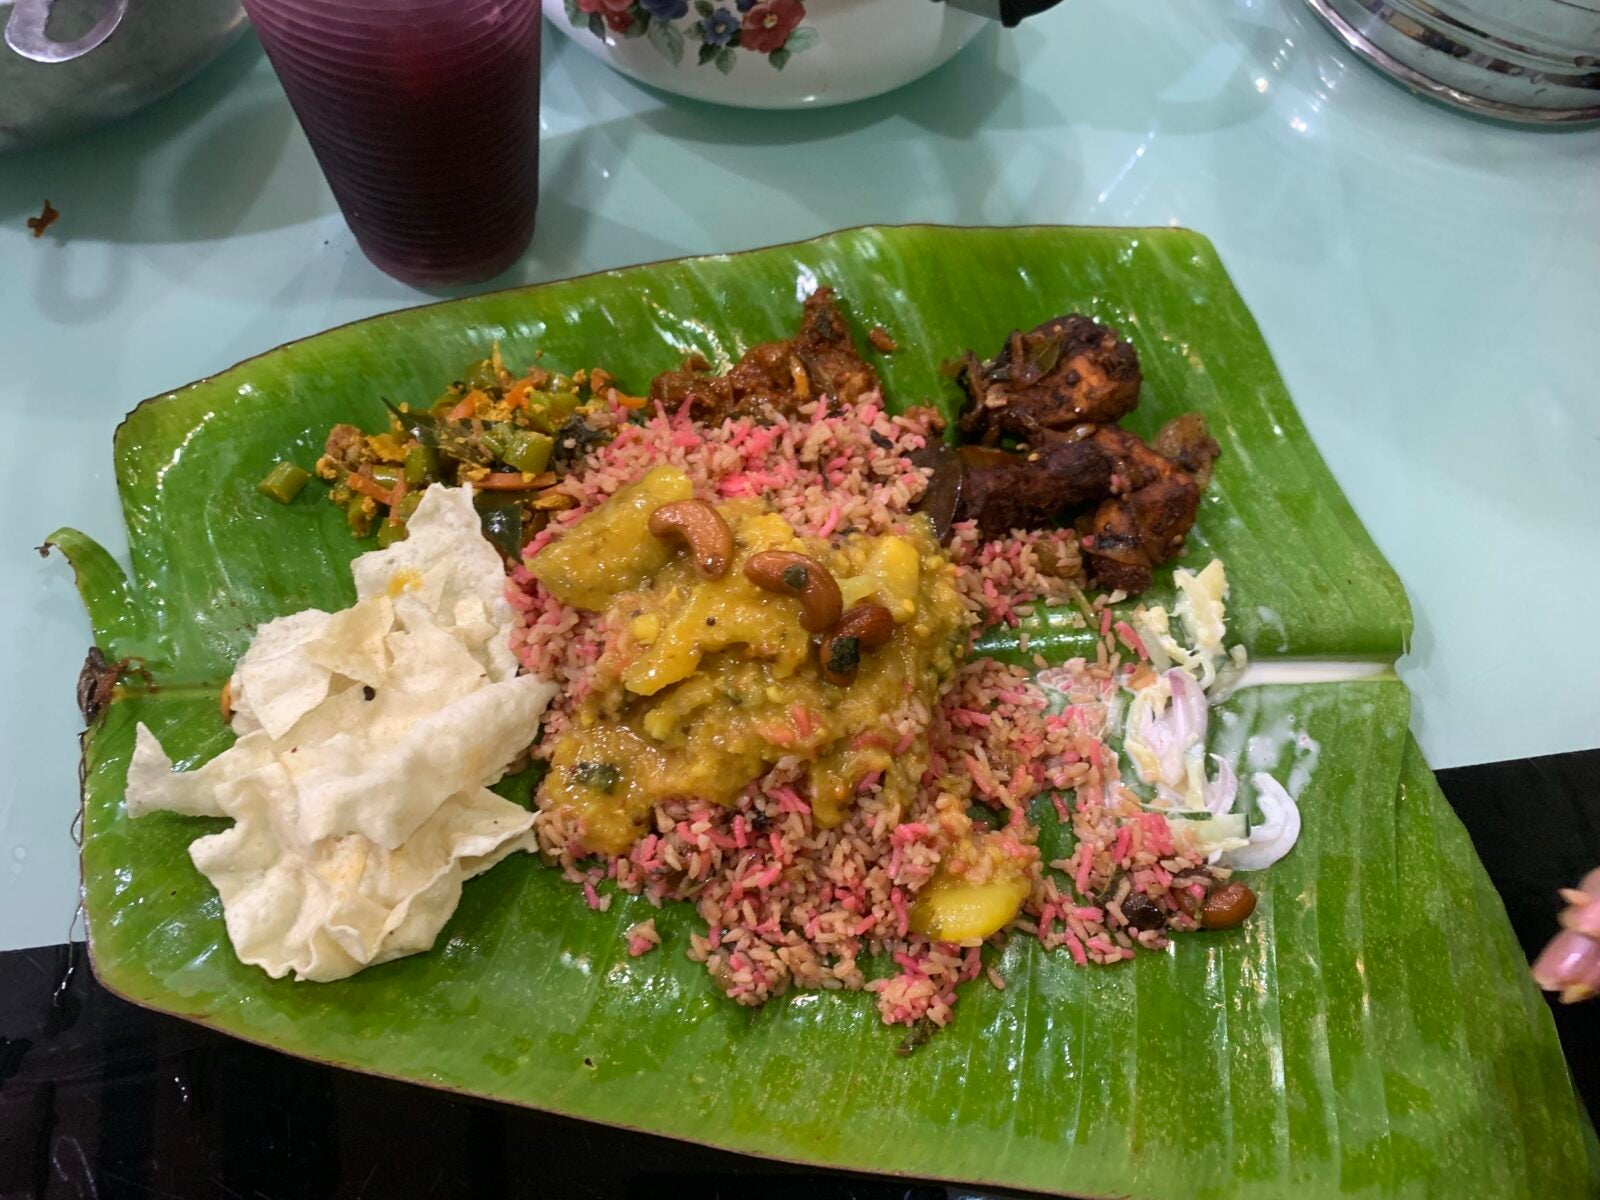 A banana leaf serving of Indian dish including nasi hujan, papadam, mutton curry, chicken 65, dhaal and yoghurt vegetable.